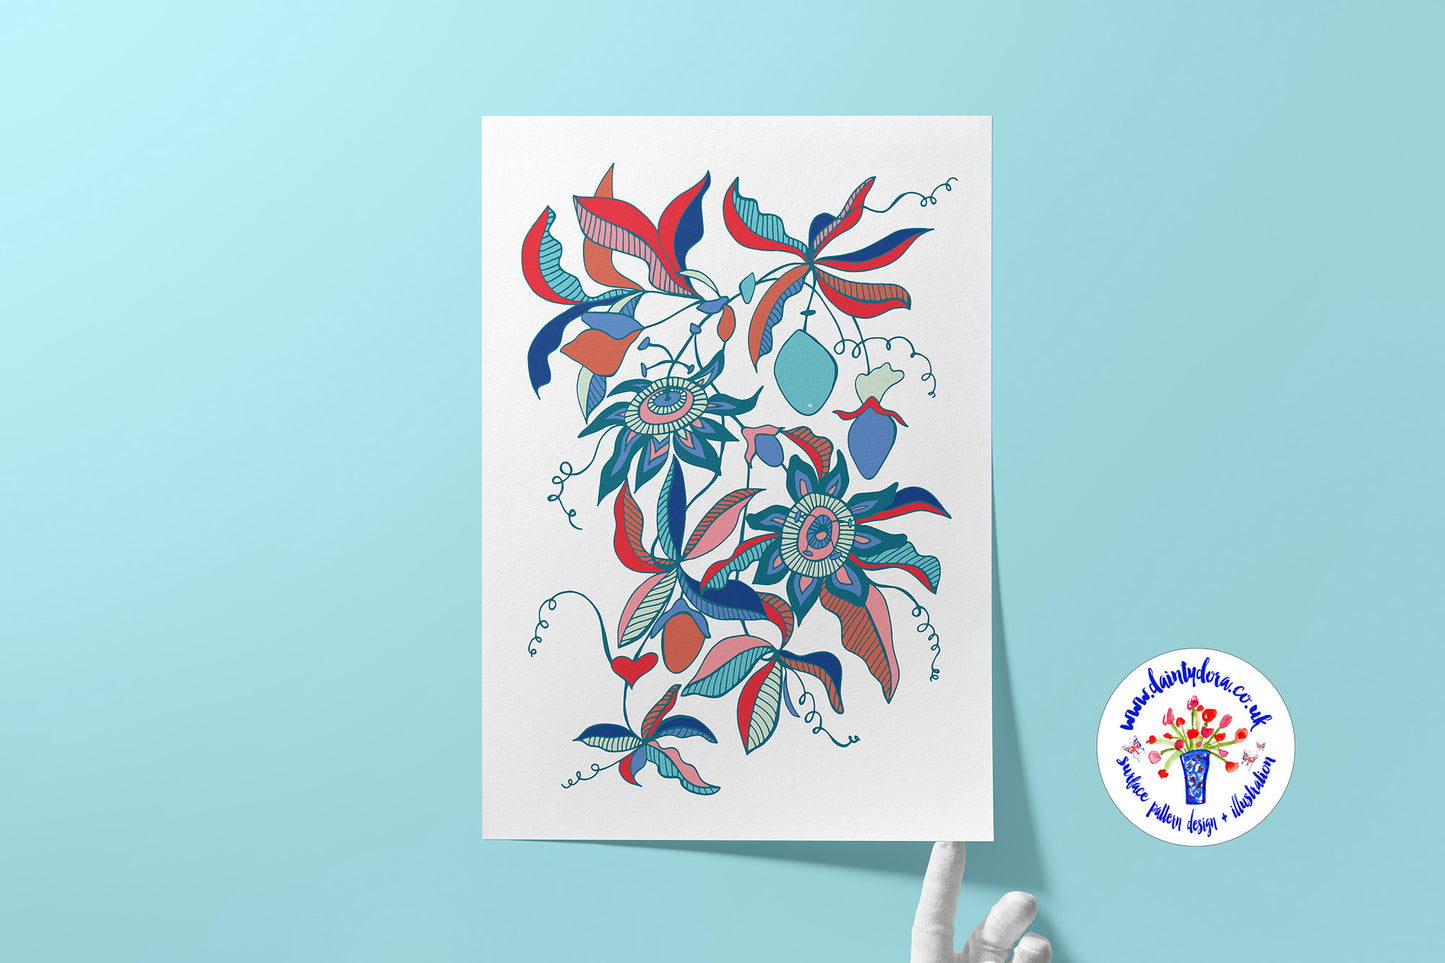 Passionflower 'Passiflora' Stylised Floral Art Print - Mid-Century Vibes - A4